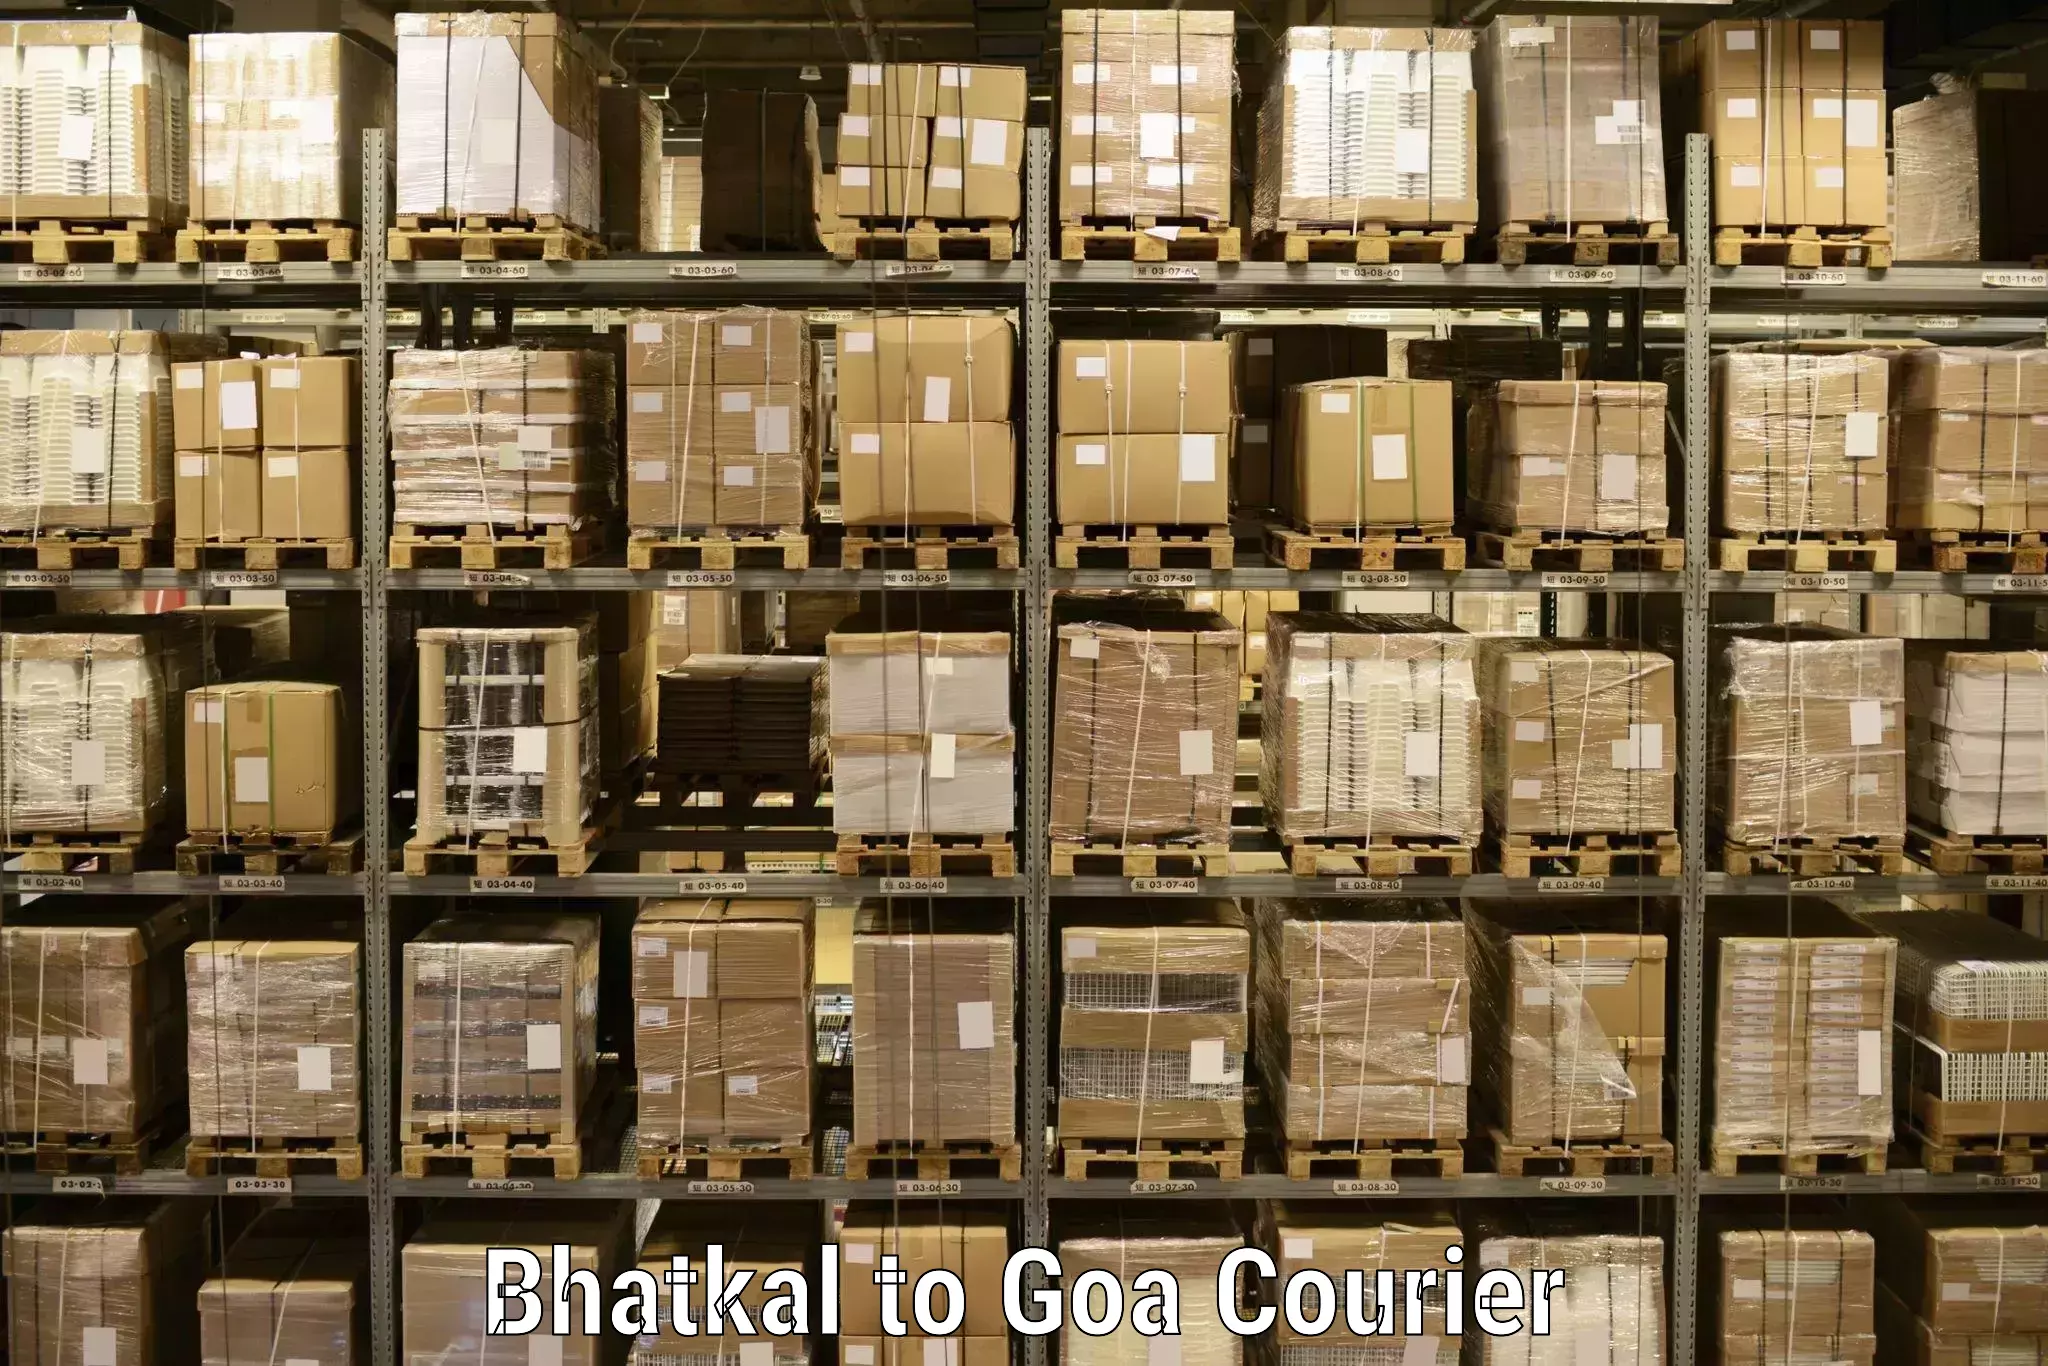 Delivery service partnership Bhatkal to Goa